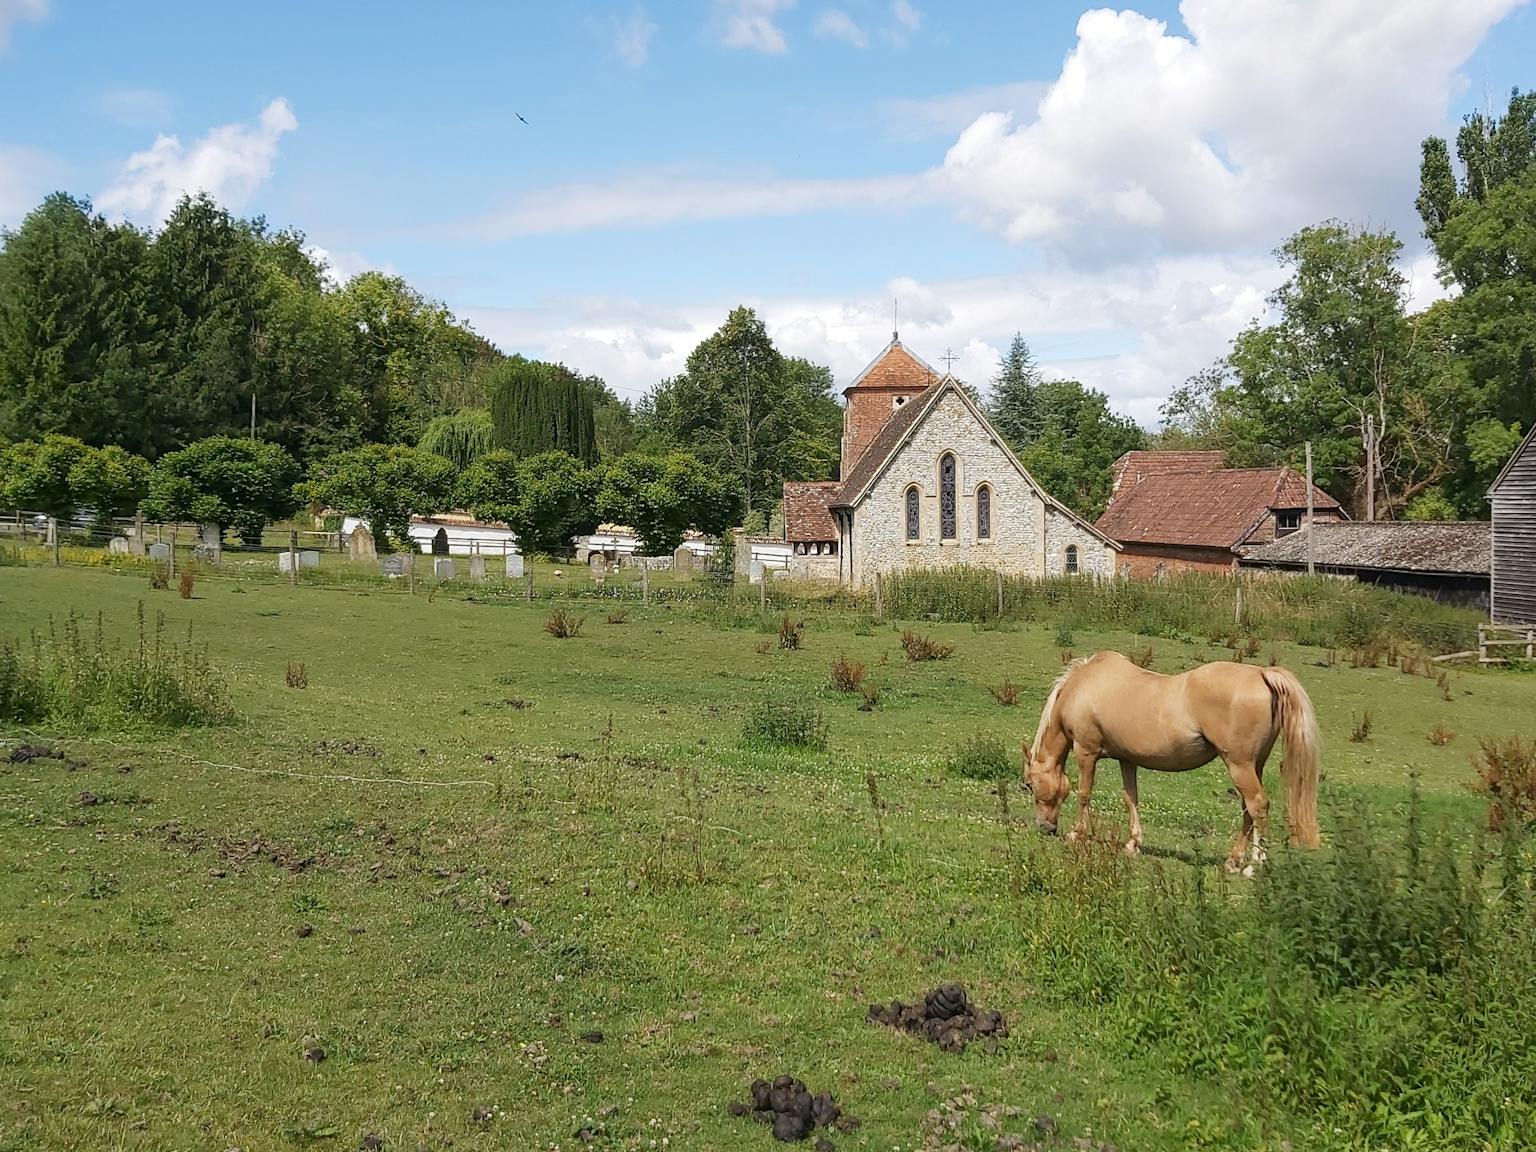 Horse and church